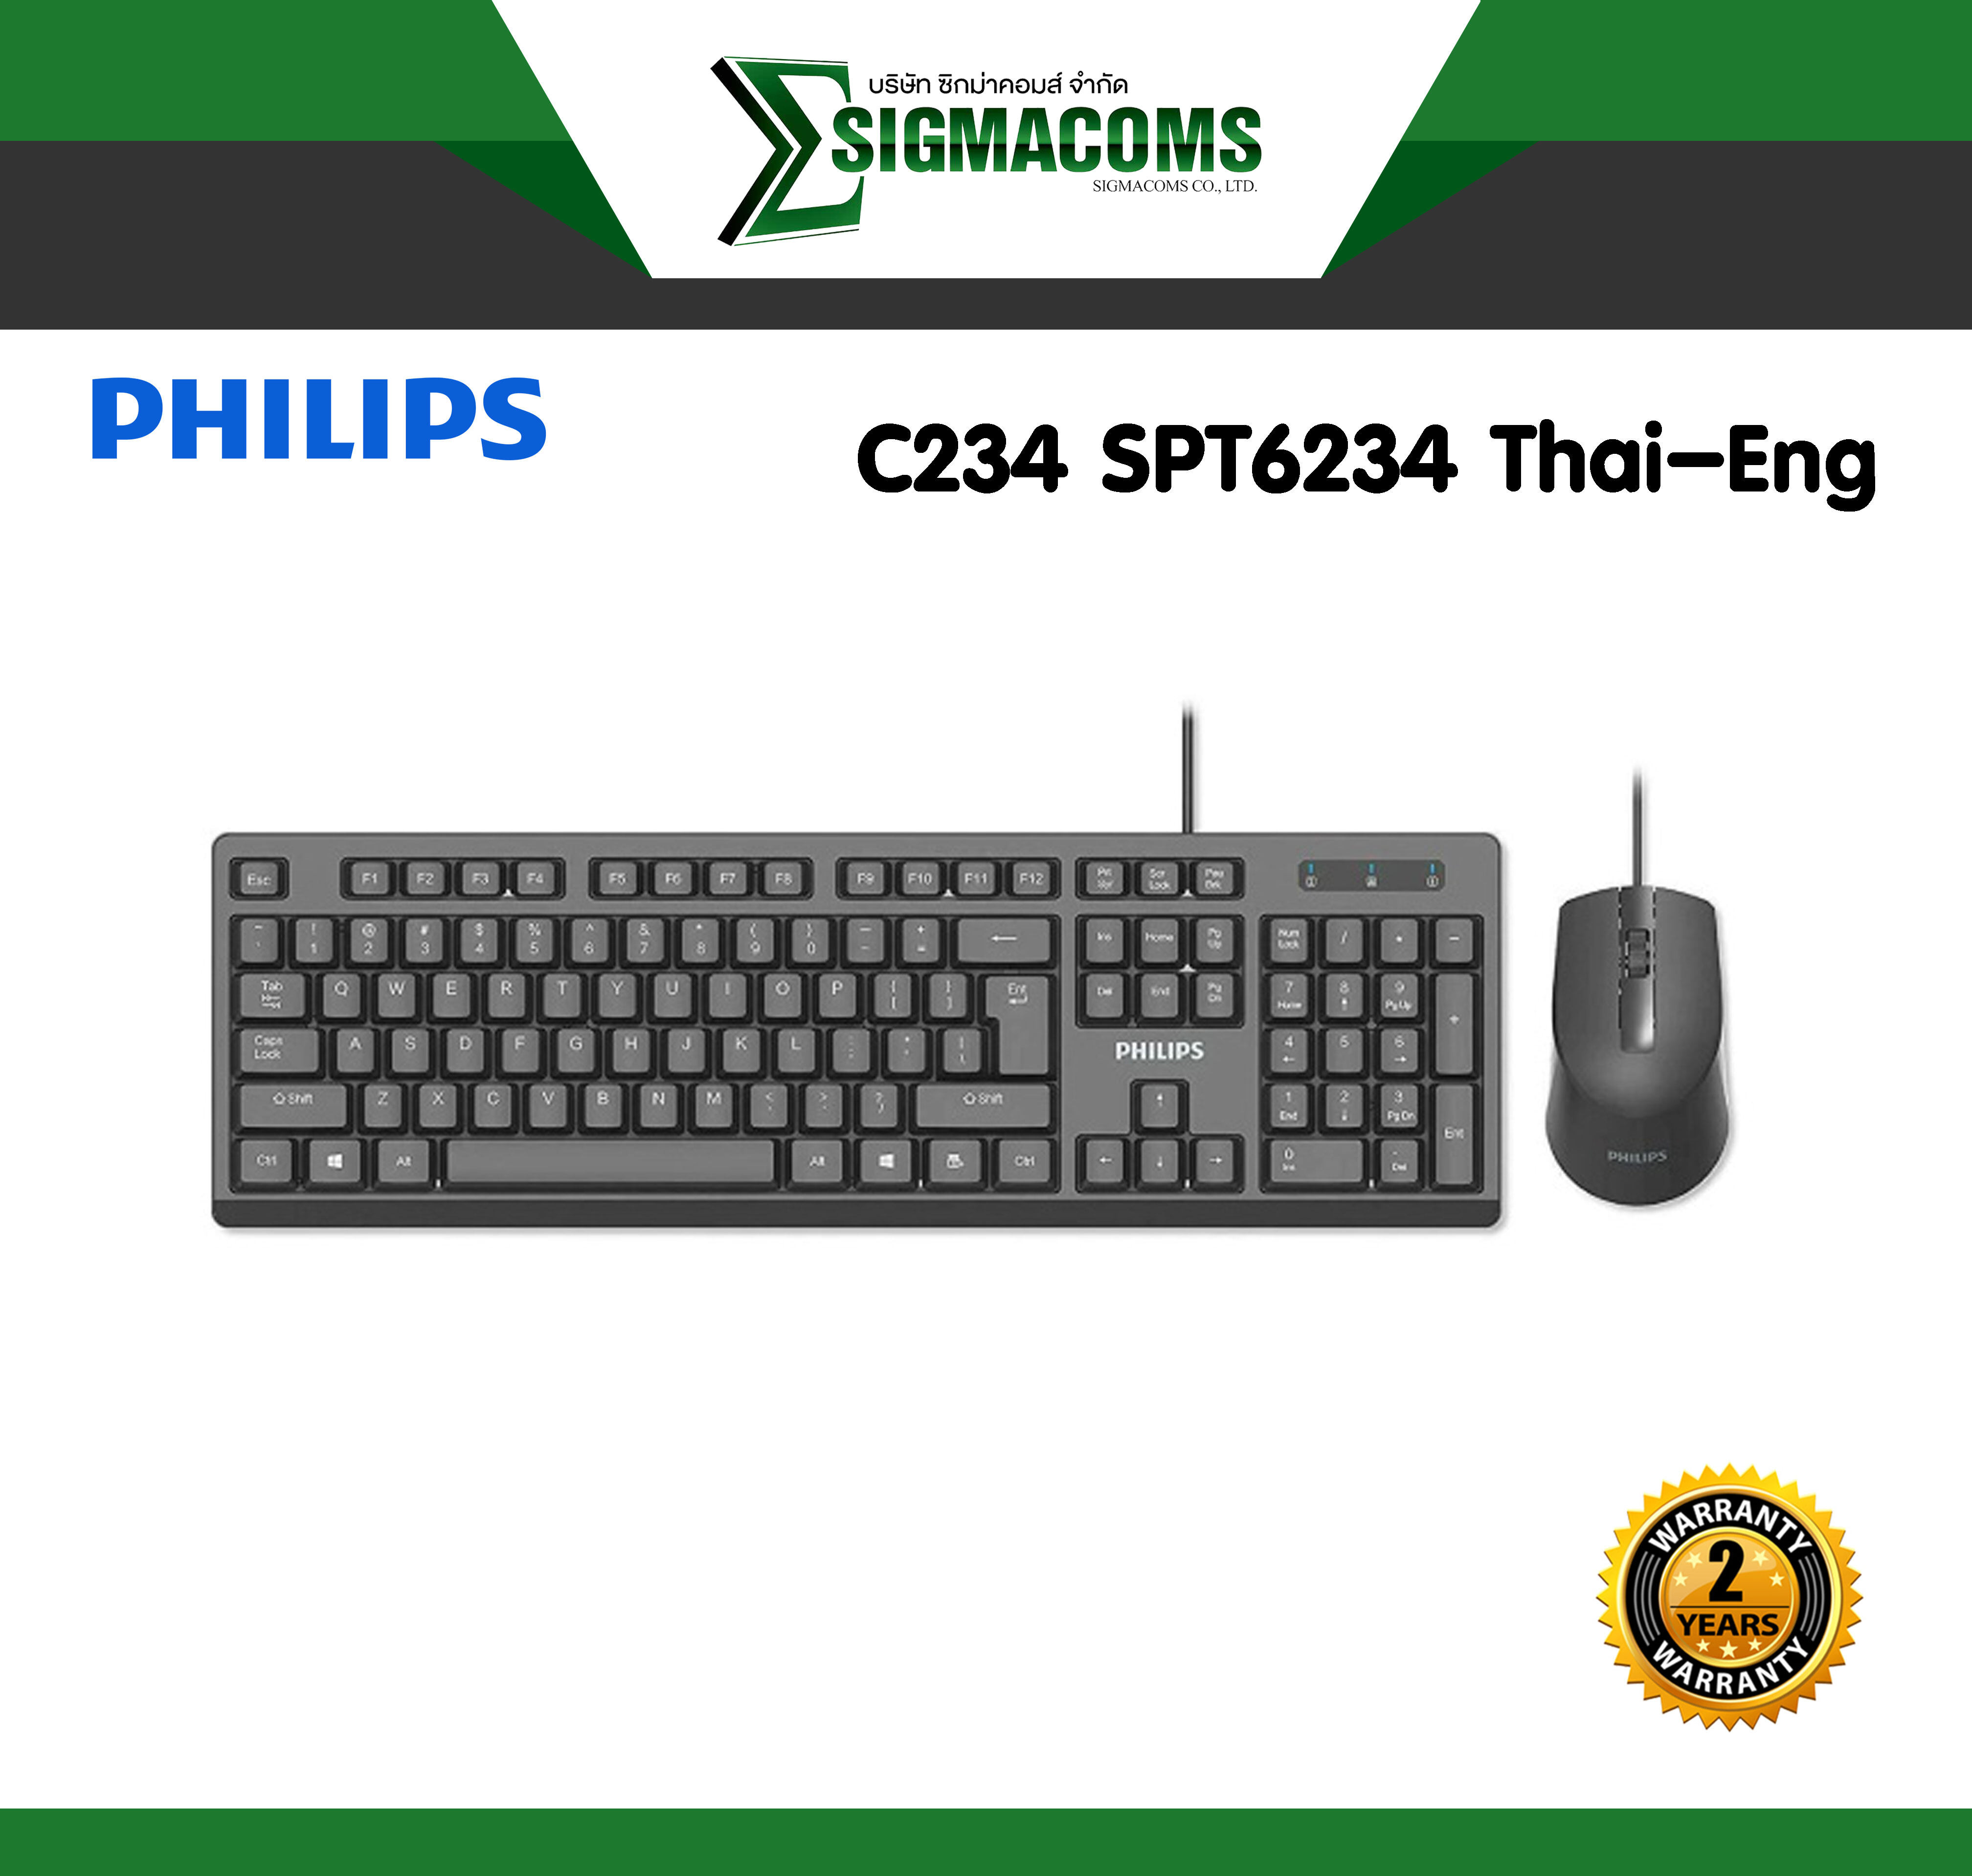 Mouse & Keyboard Philips C234 SPT6234 Thai-Eng ของใหม่ !! ประกัน 2 ปี